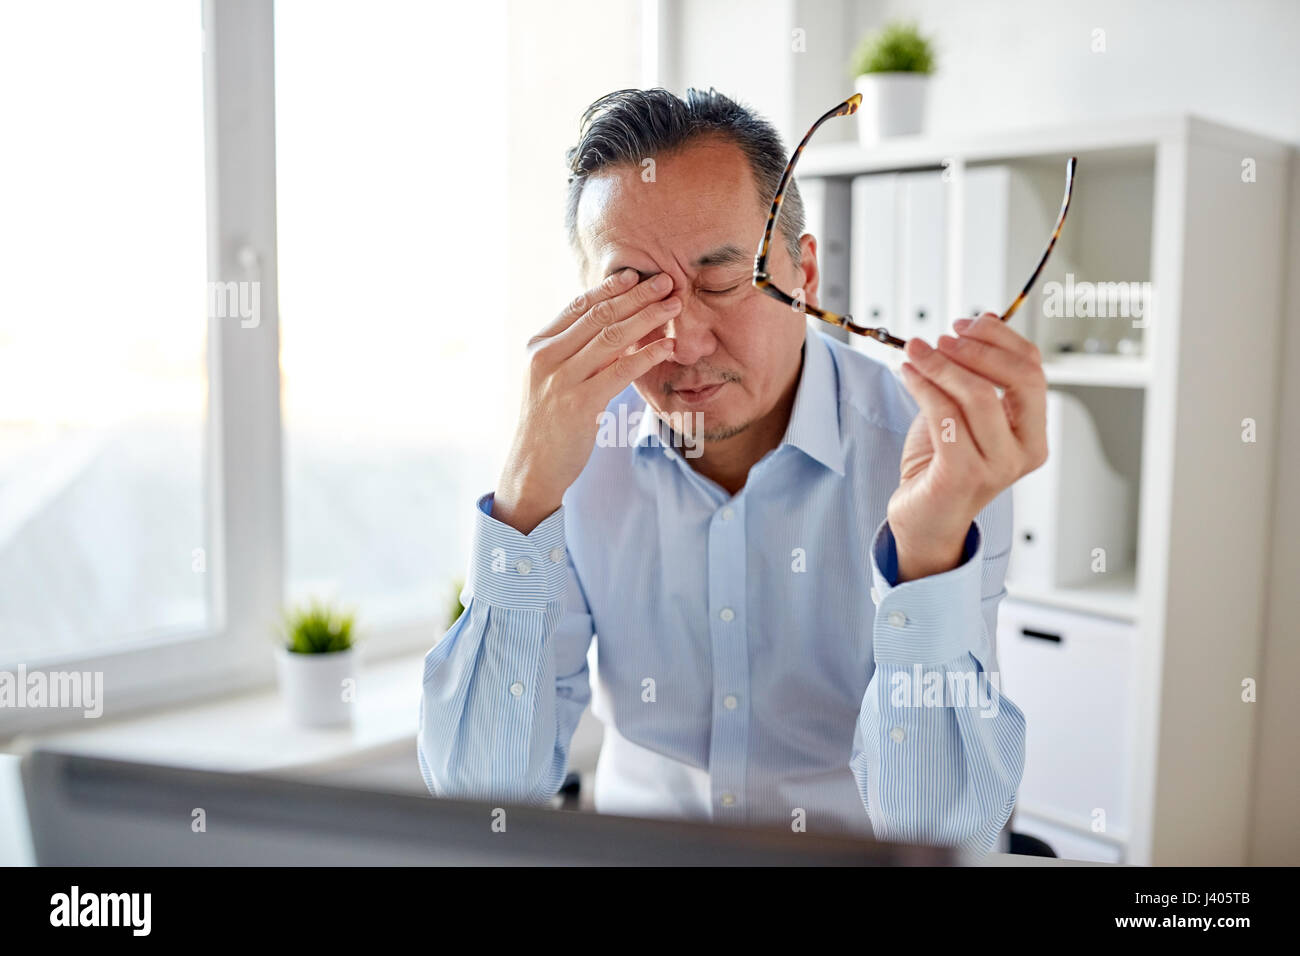 Tired businessman with glasses at laptop in office Banque D'Images